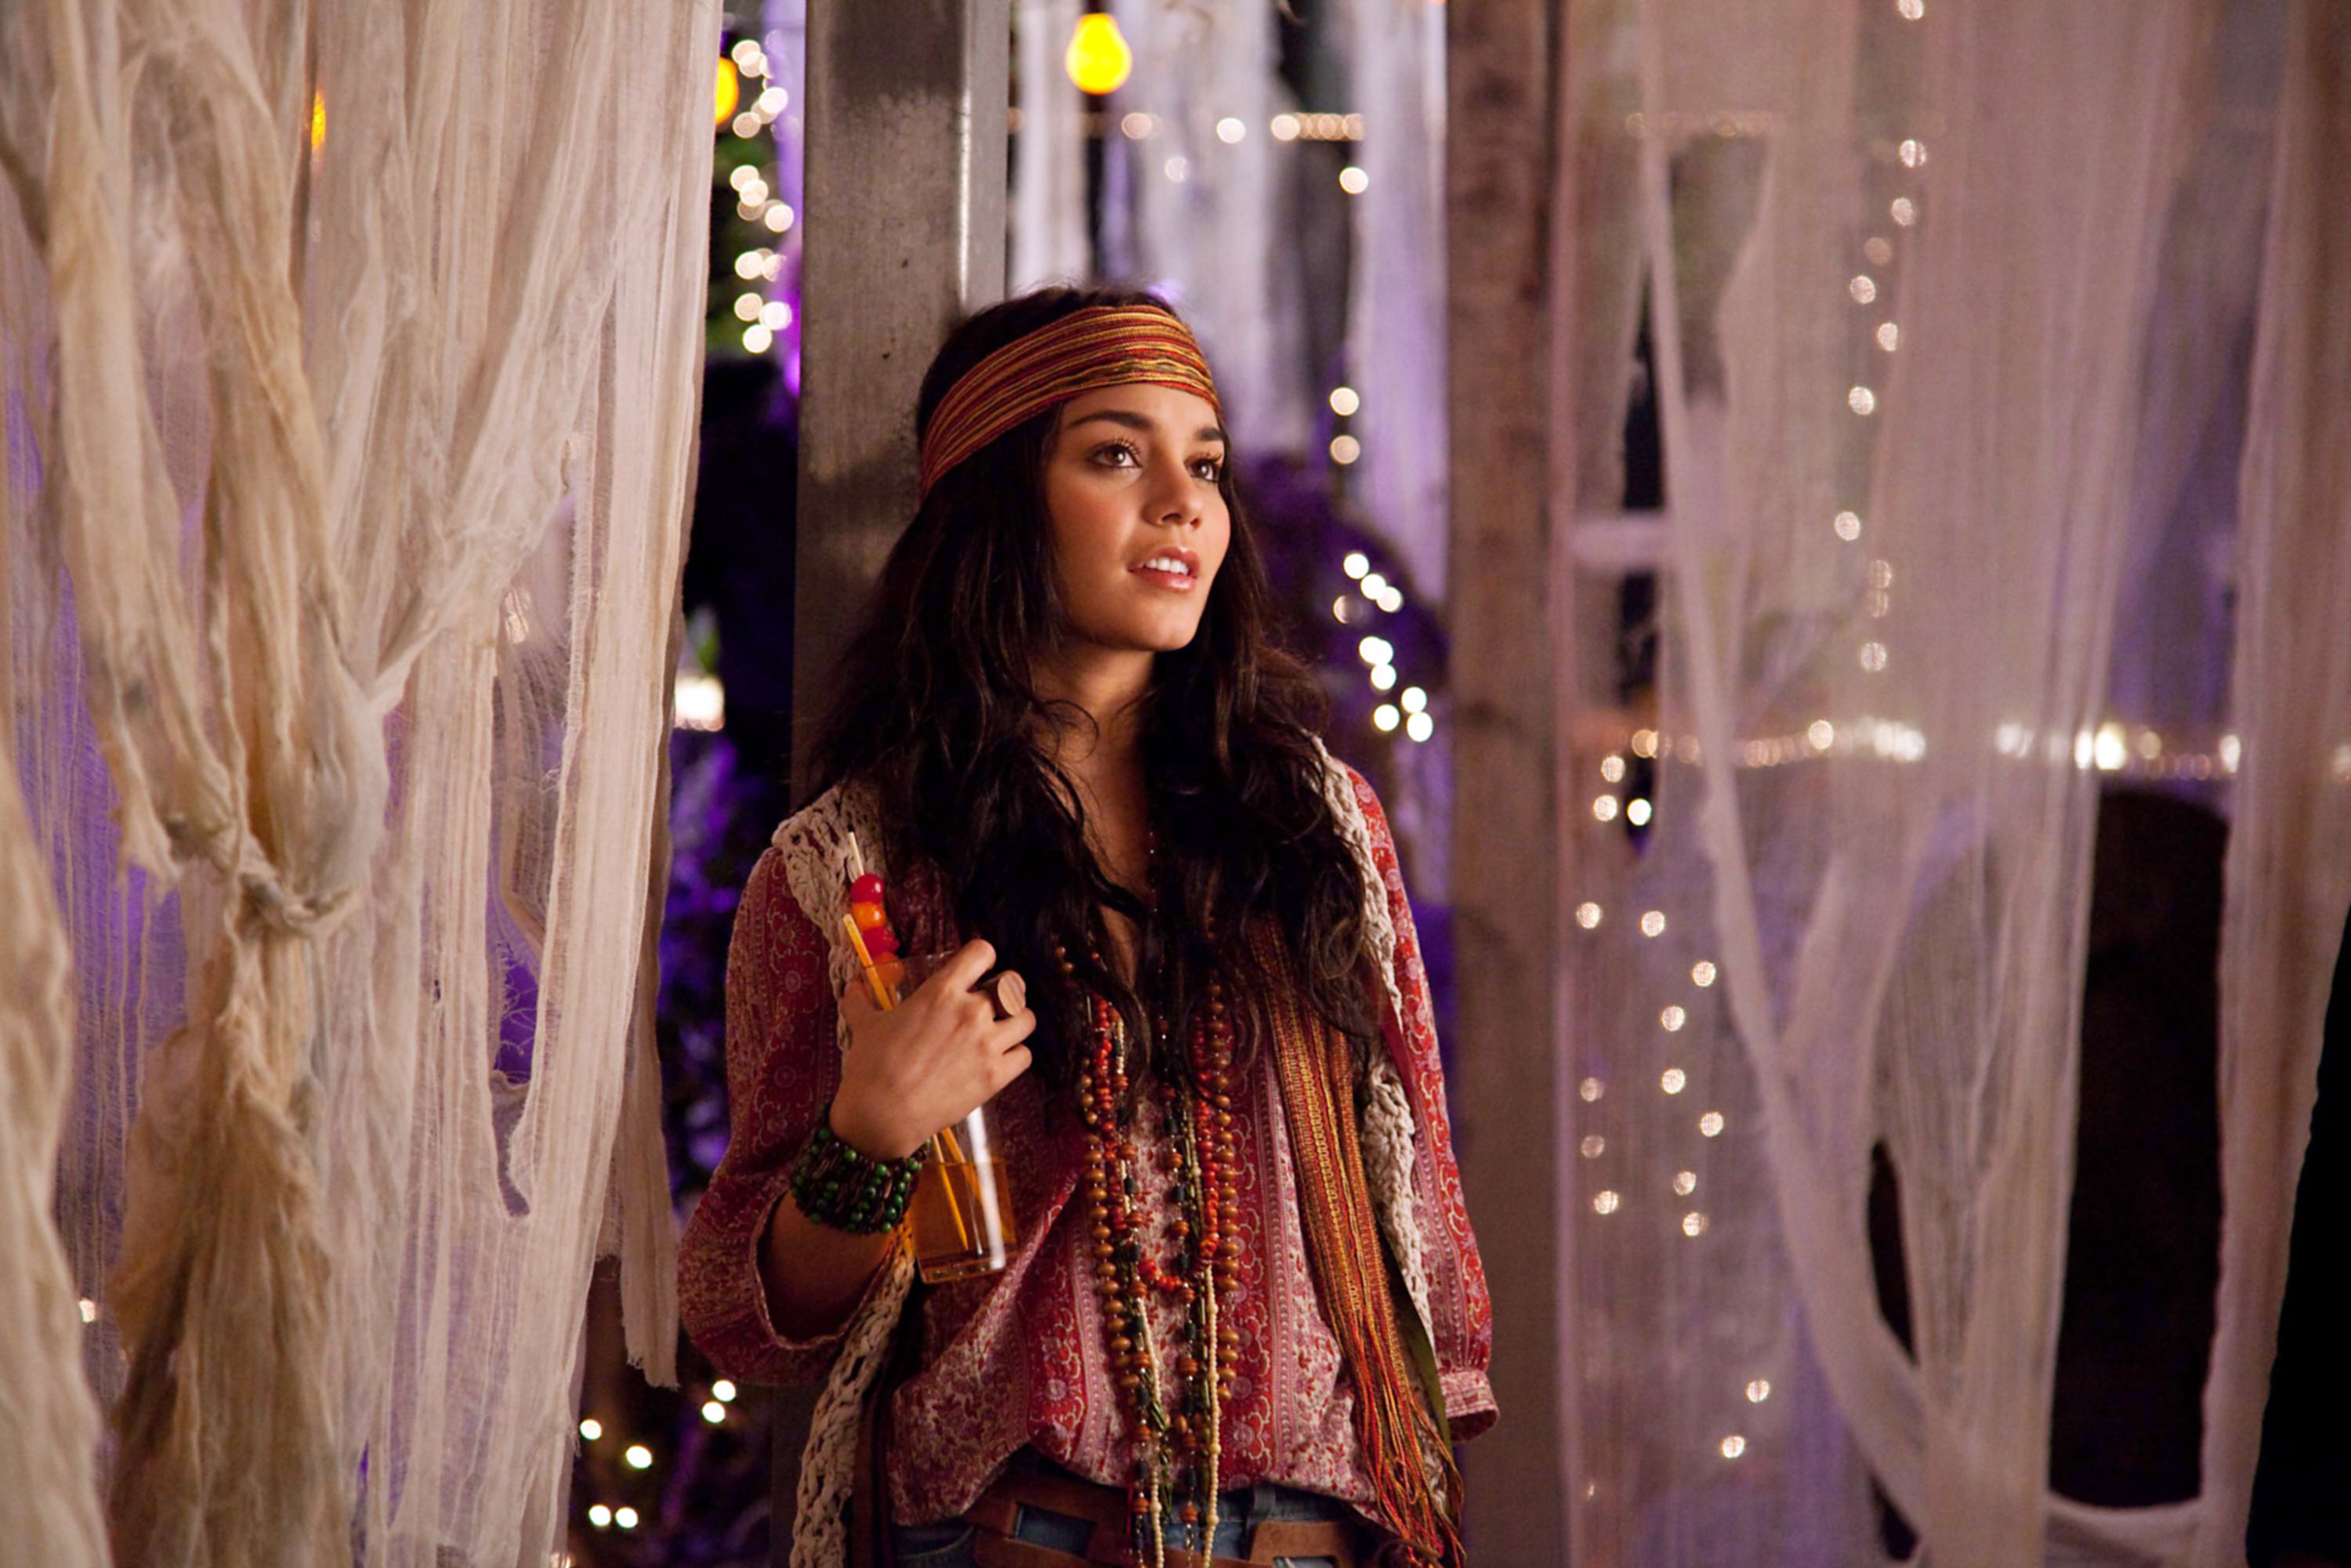 Lindy in a hippie costume with a scarf, beads, and vests